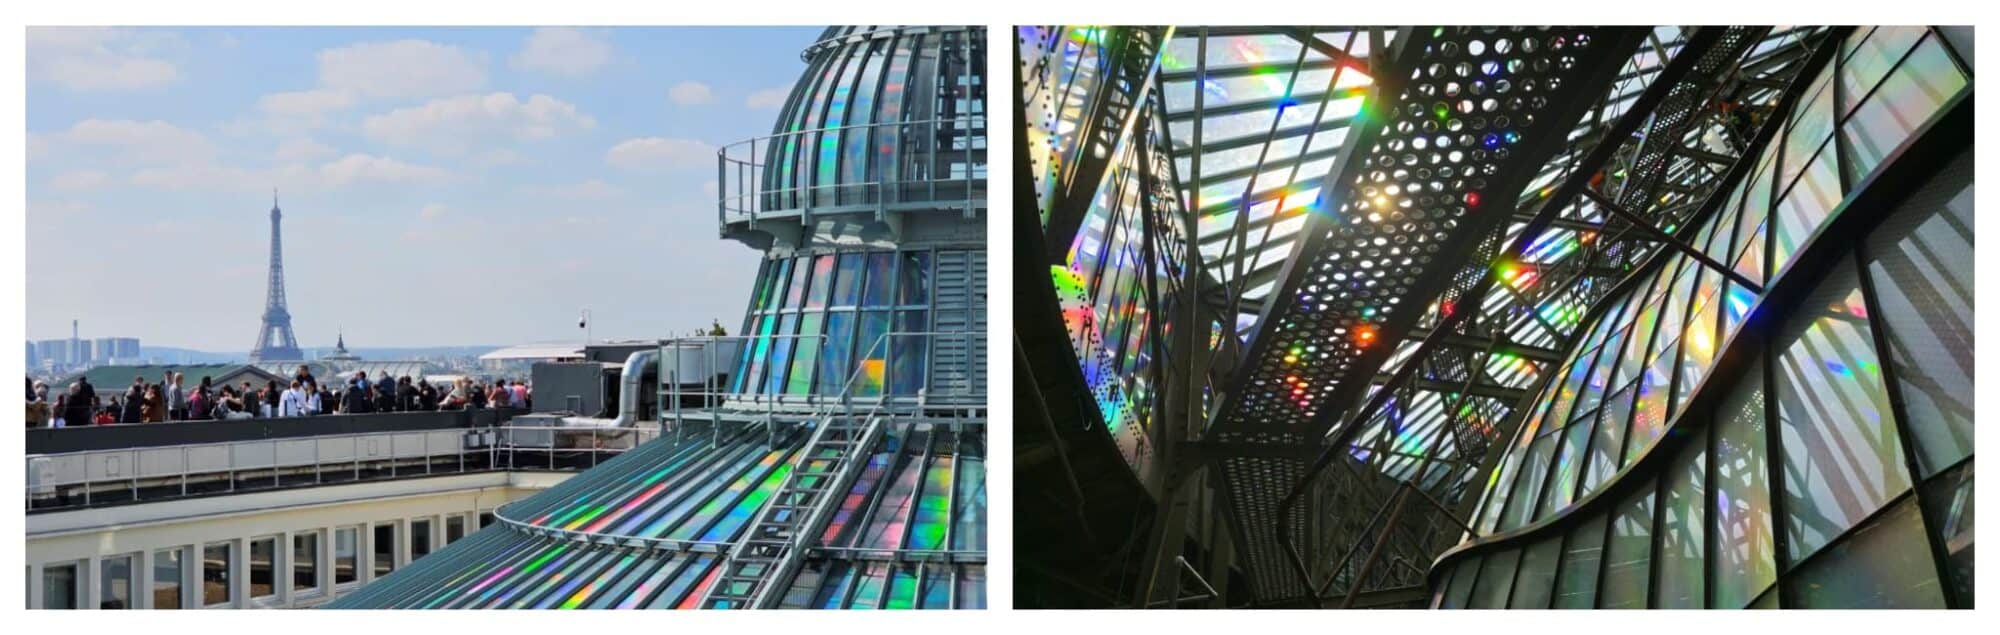 Left: the roof top terrace at Galeries Lafayette with the luminous installation by Kim Sooja covering the dome; right: the inside of the dome with the light diffracted from Sooja's installation.
